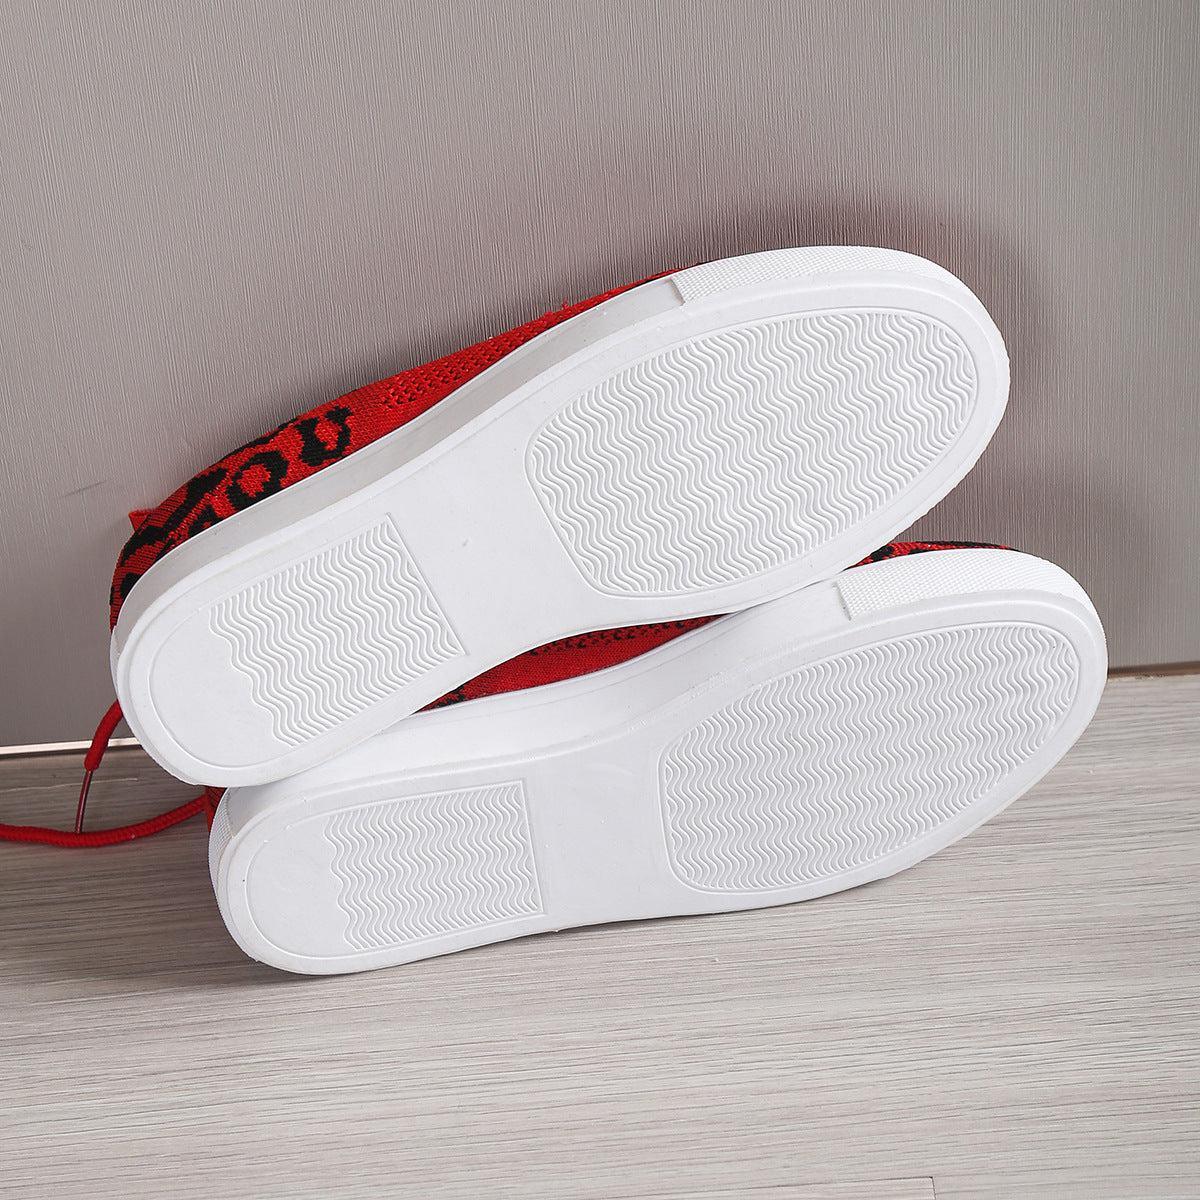 a pair of white and red shoes sitting on top of a wooden floor